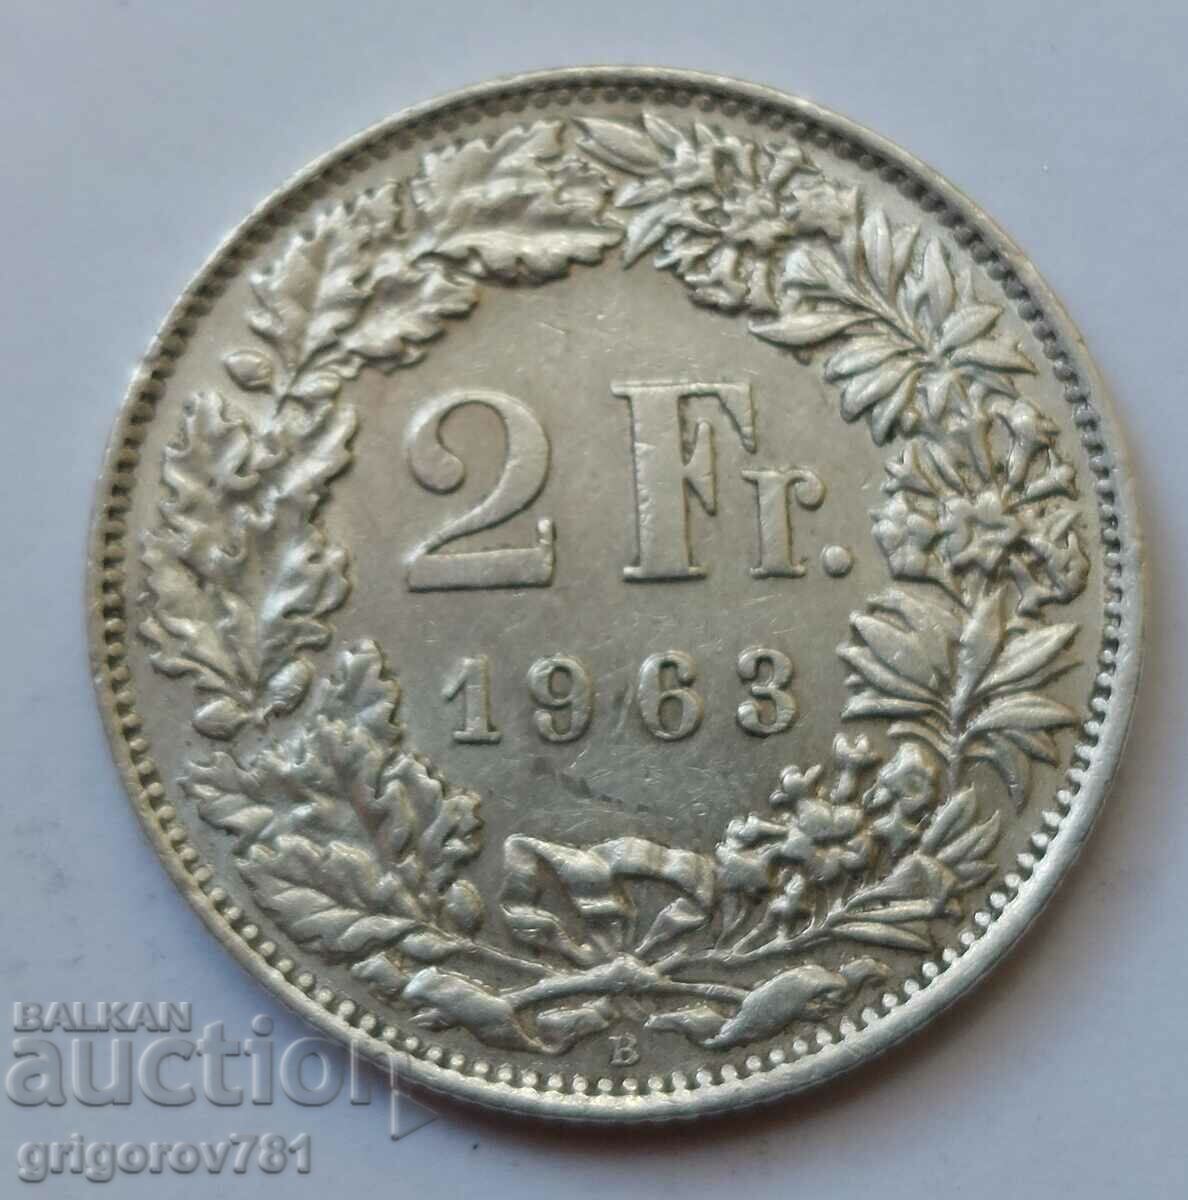 2 Francs Silver Switzerland 1963 B - Silver Coin #14